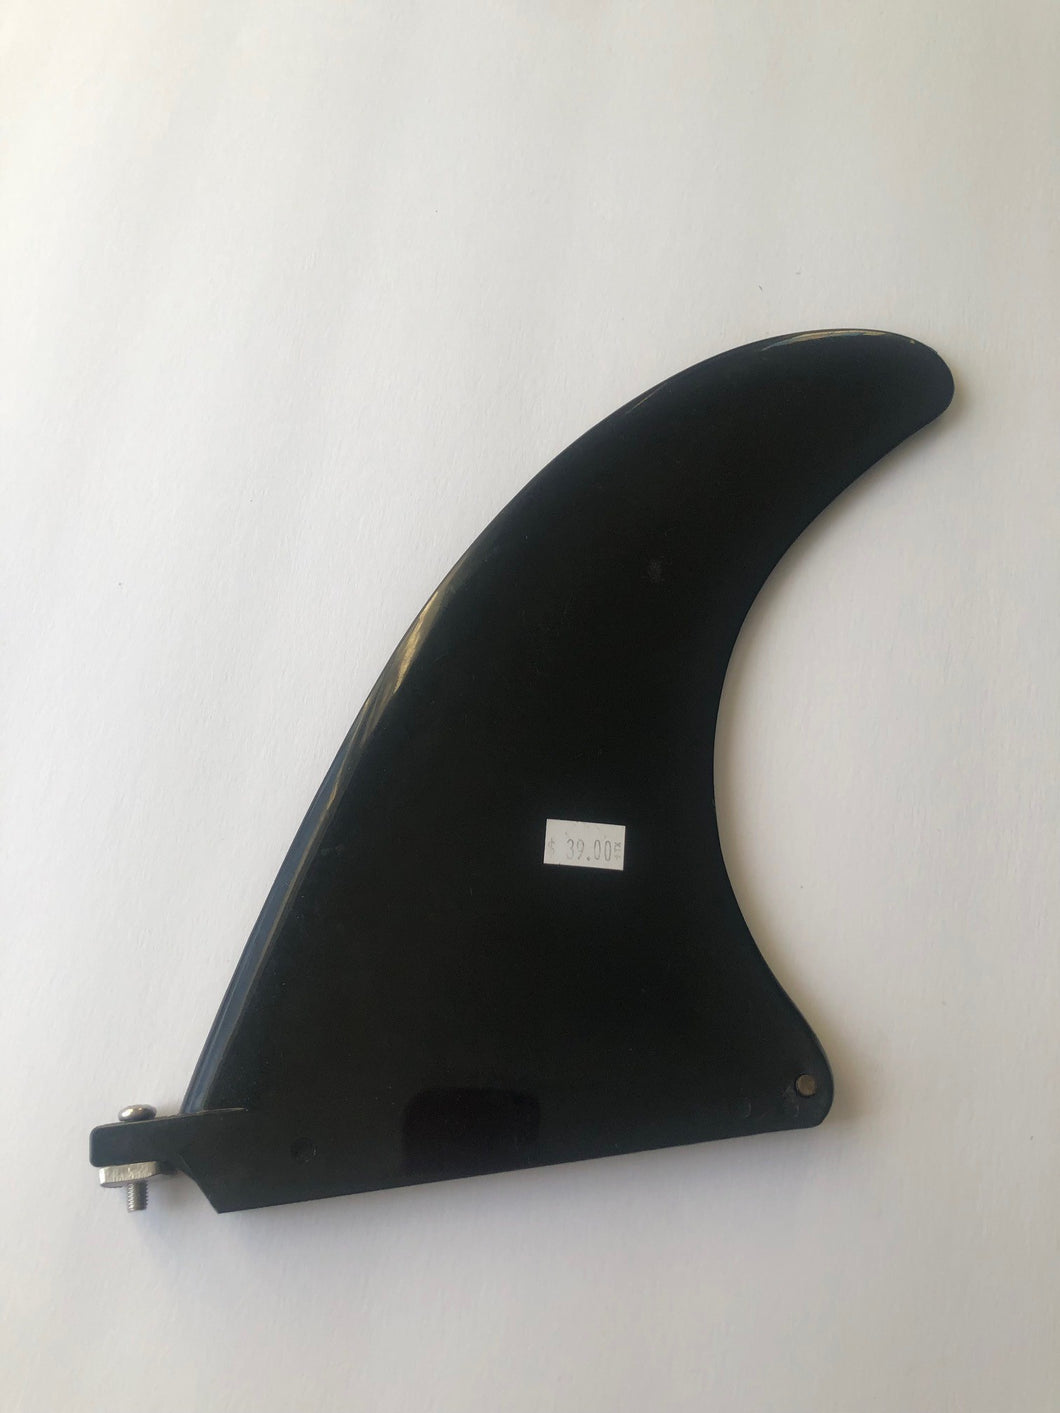 Plastic SUP Replacement Fin